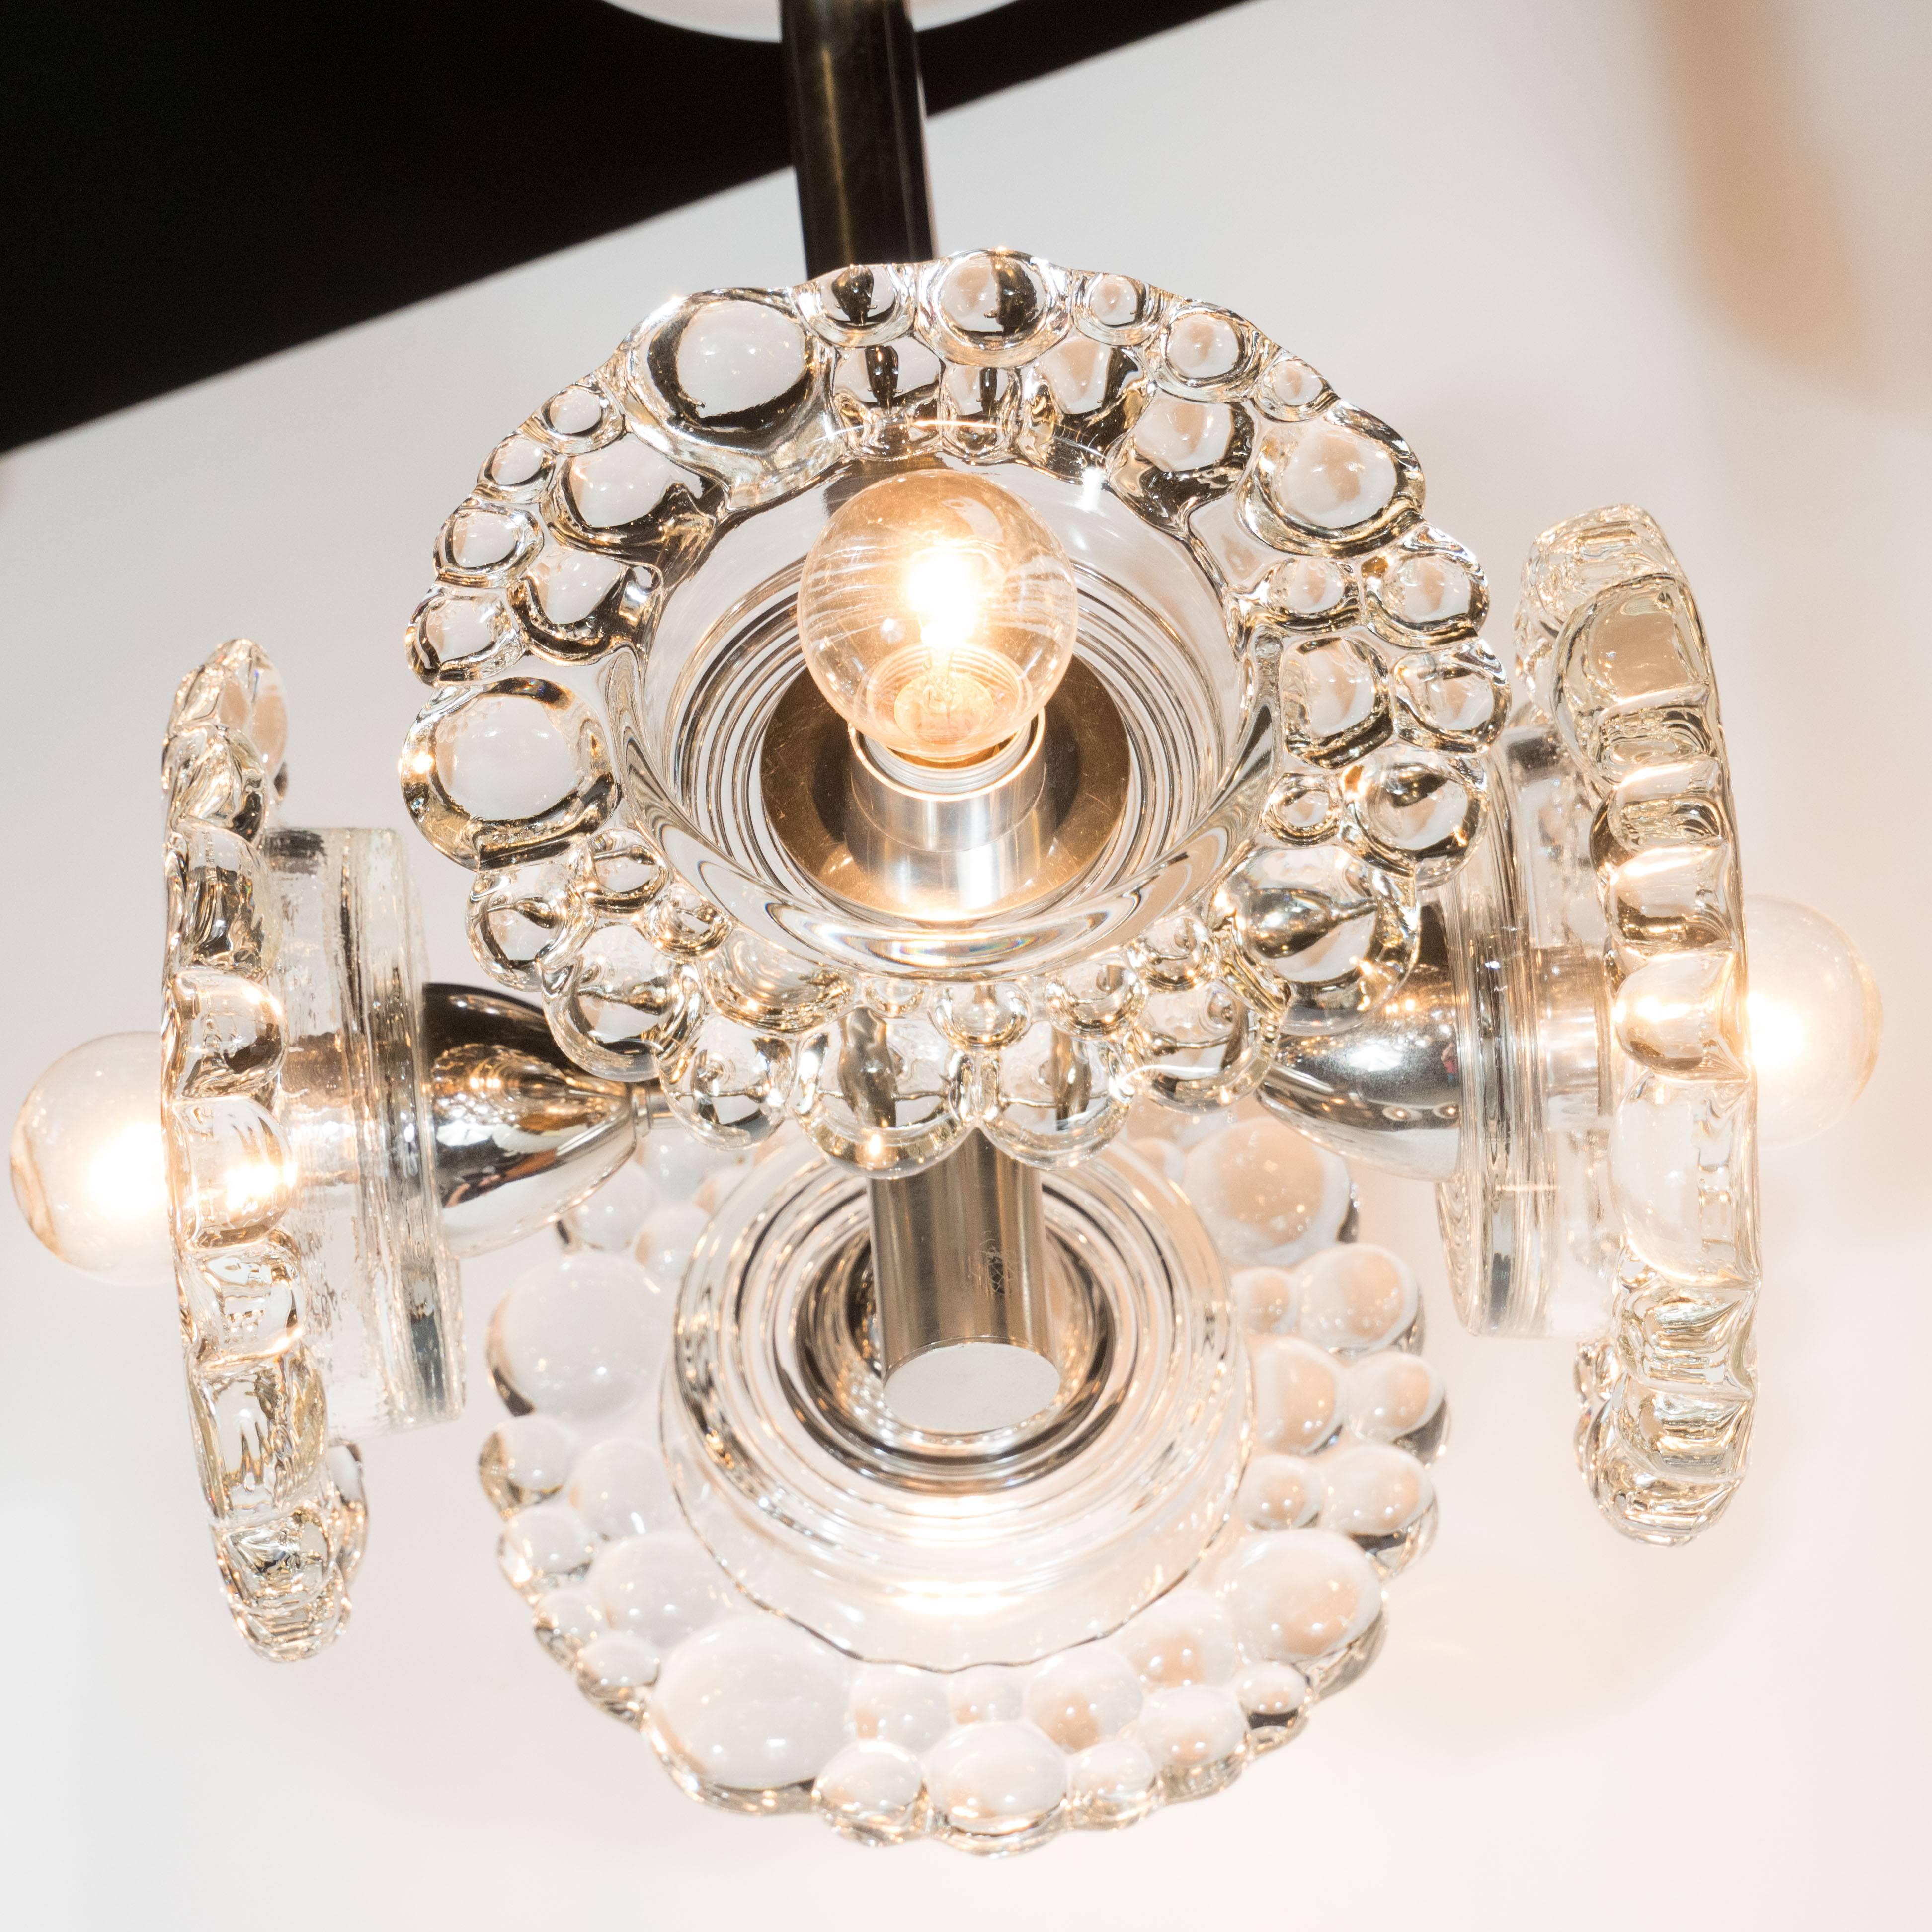 Austrian Mid-Century Modern Chrome Chandelier with Abstracted Floral Shades, J.T. Kalmar For Sale